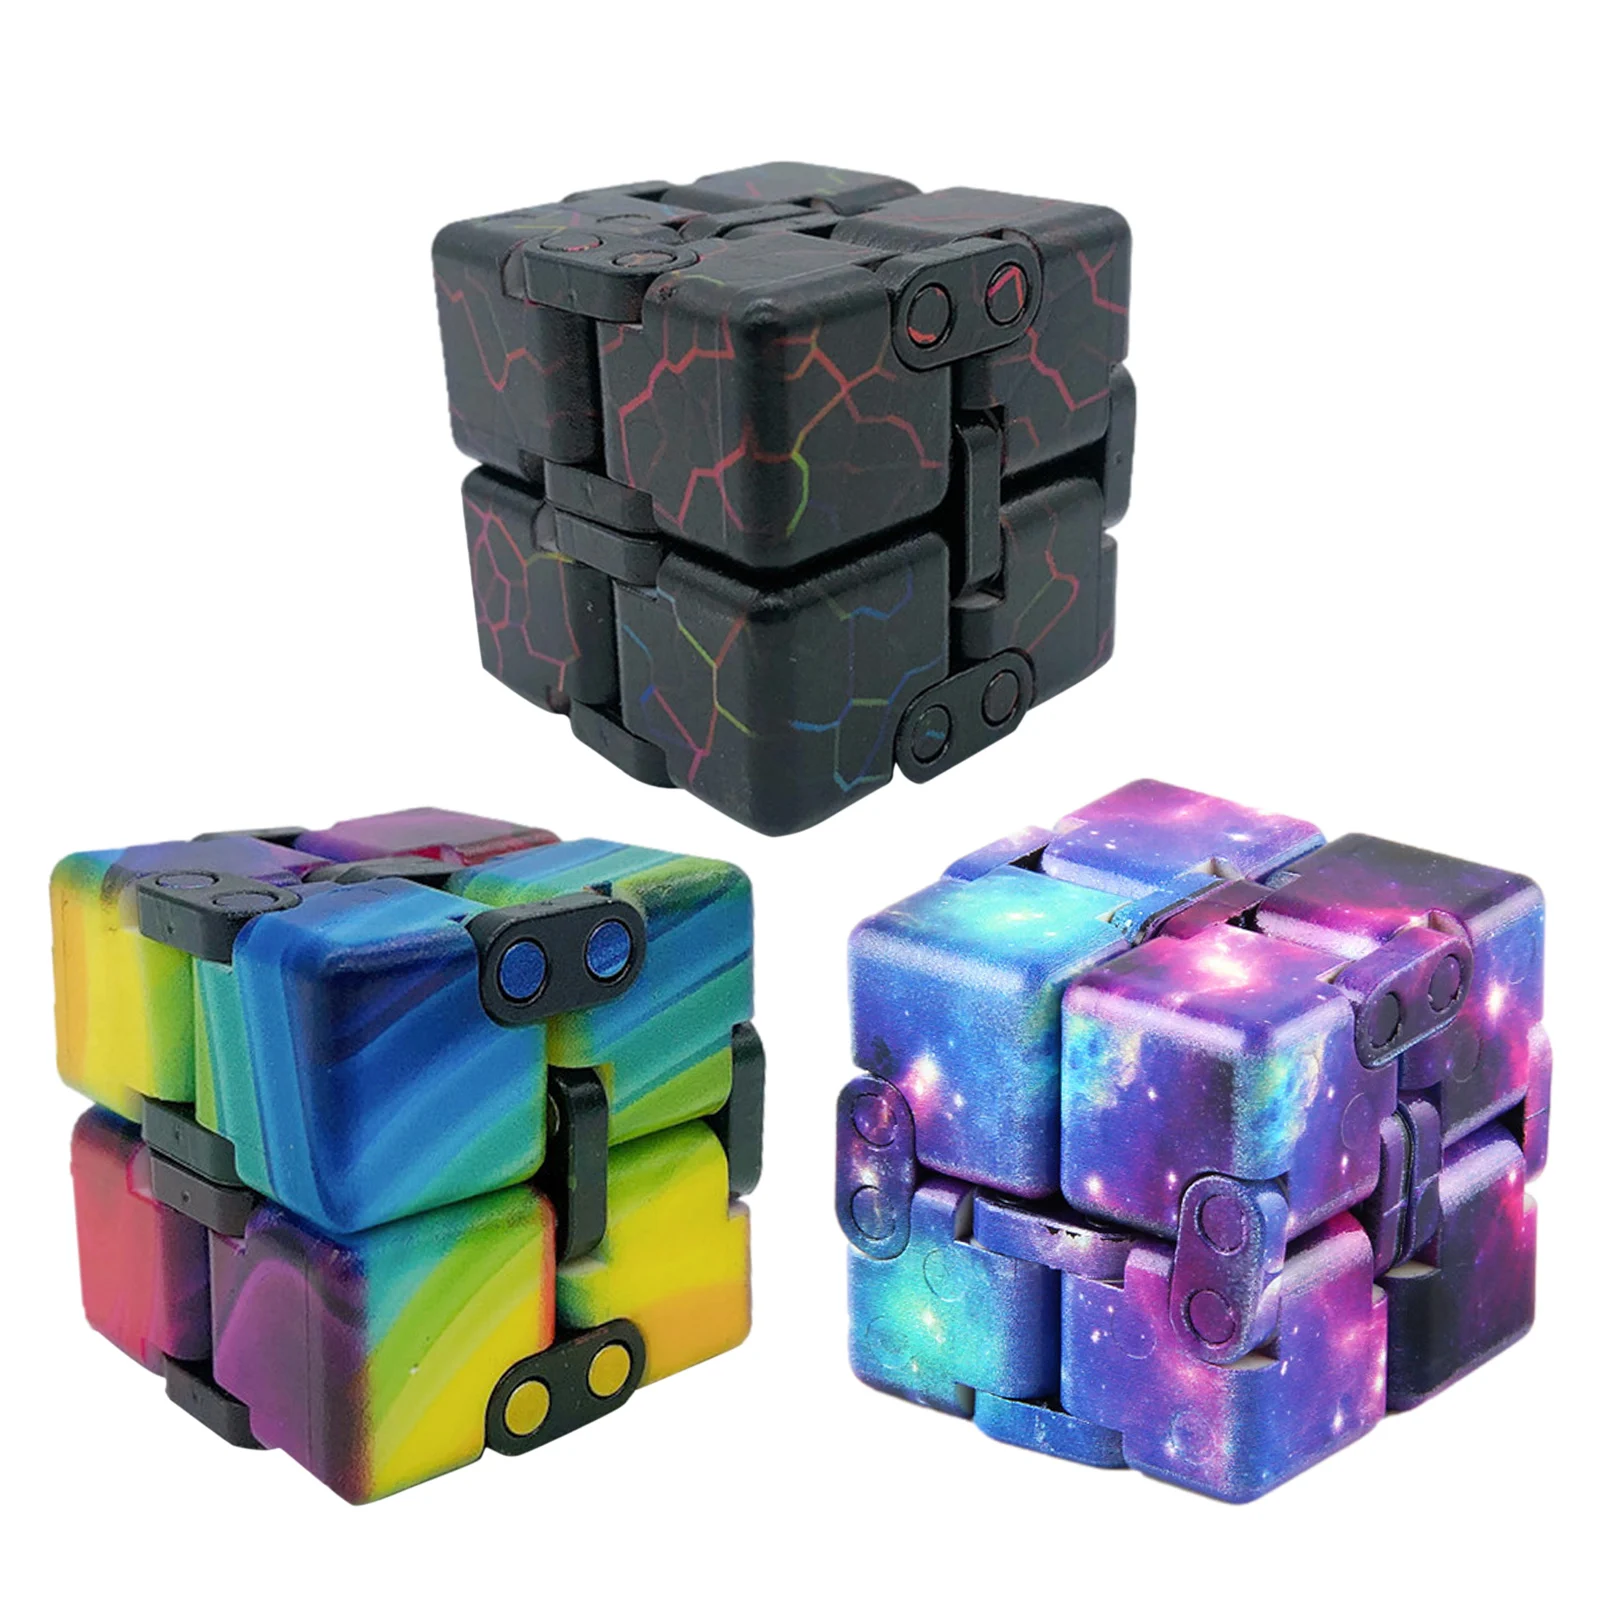 

Creative Infinite Cube Infinity Cube Magic Cube Office Flip Cubic Puzzle Stop Stress Reliever Autism Toys Educational Fidget Toy